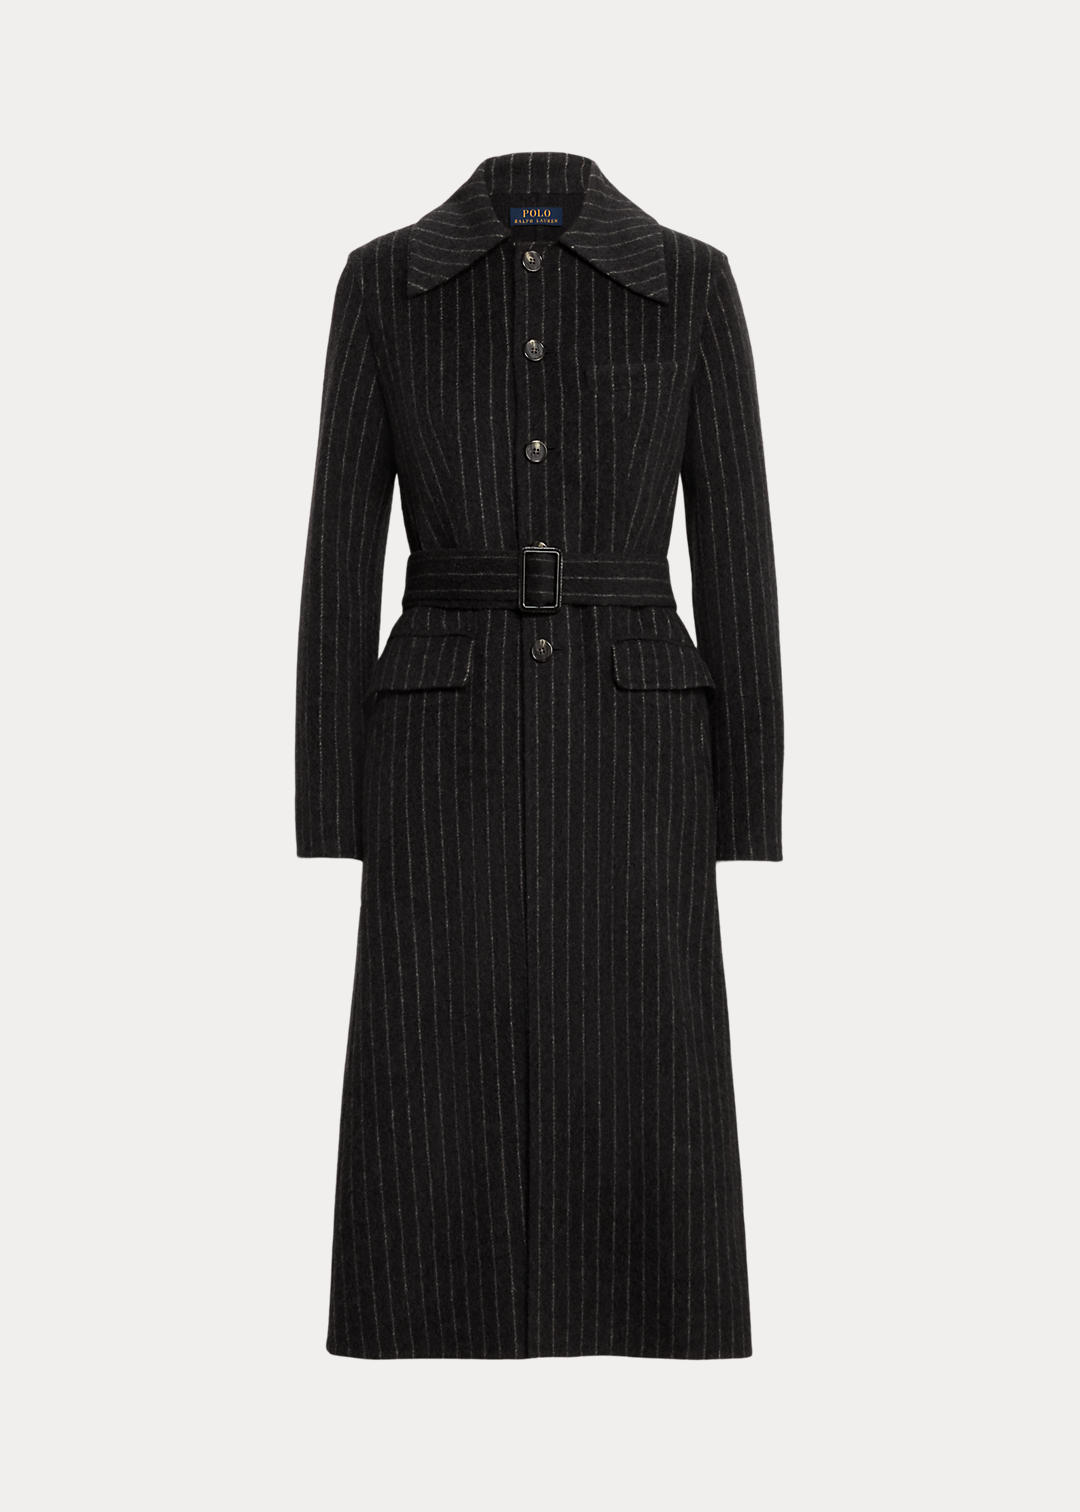 Pinstripe Double-Faced Coat